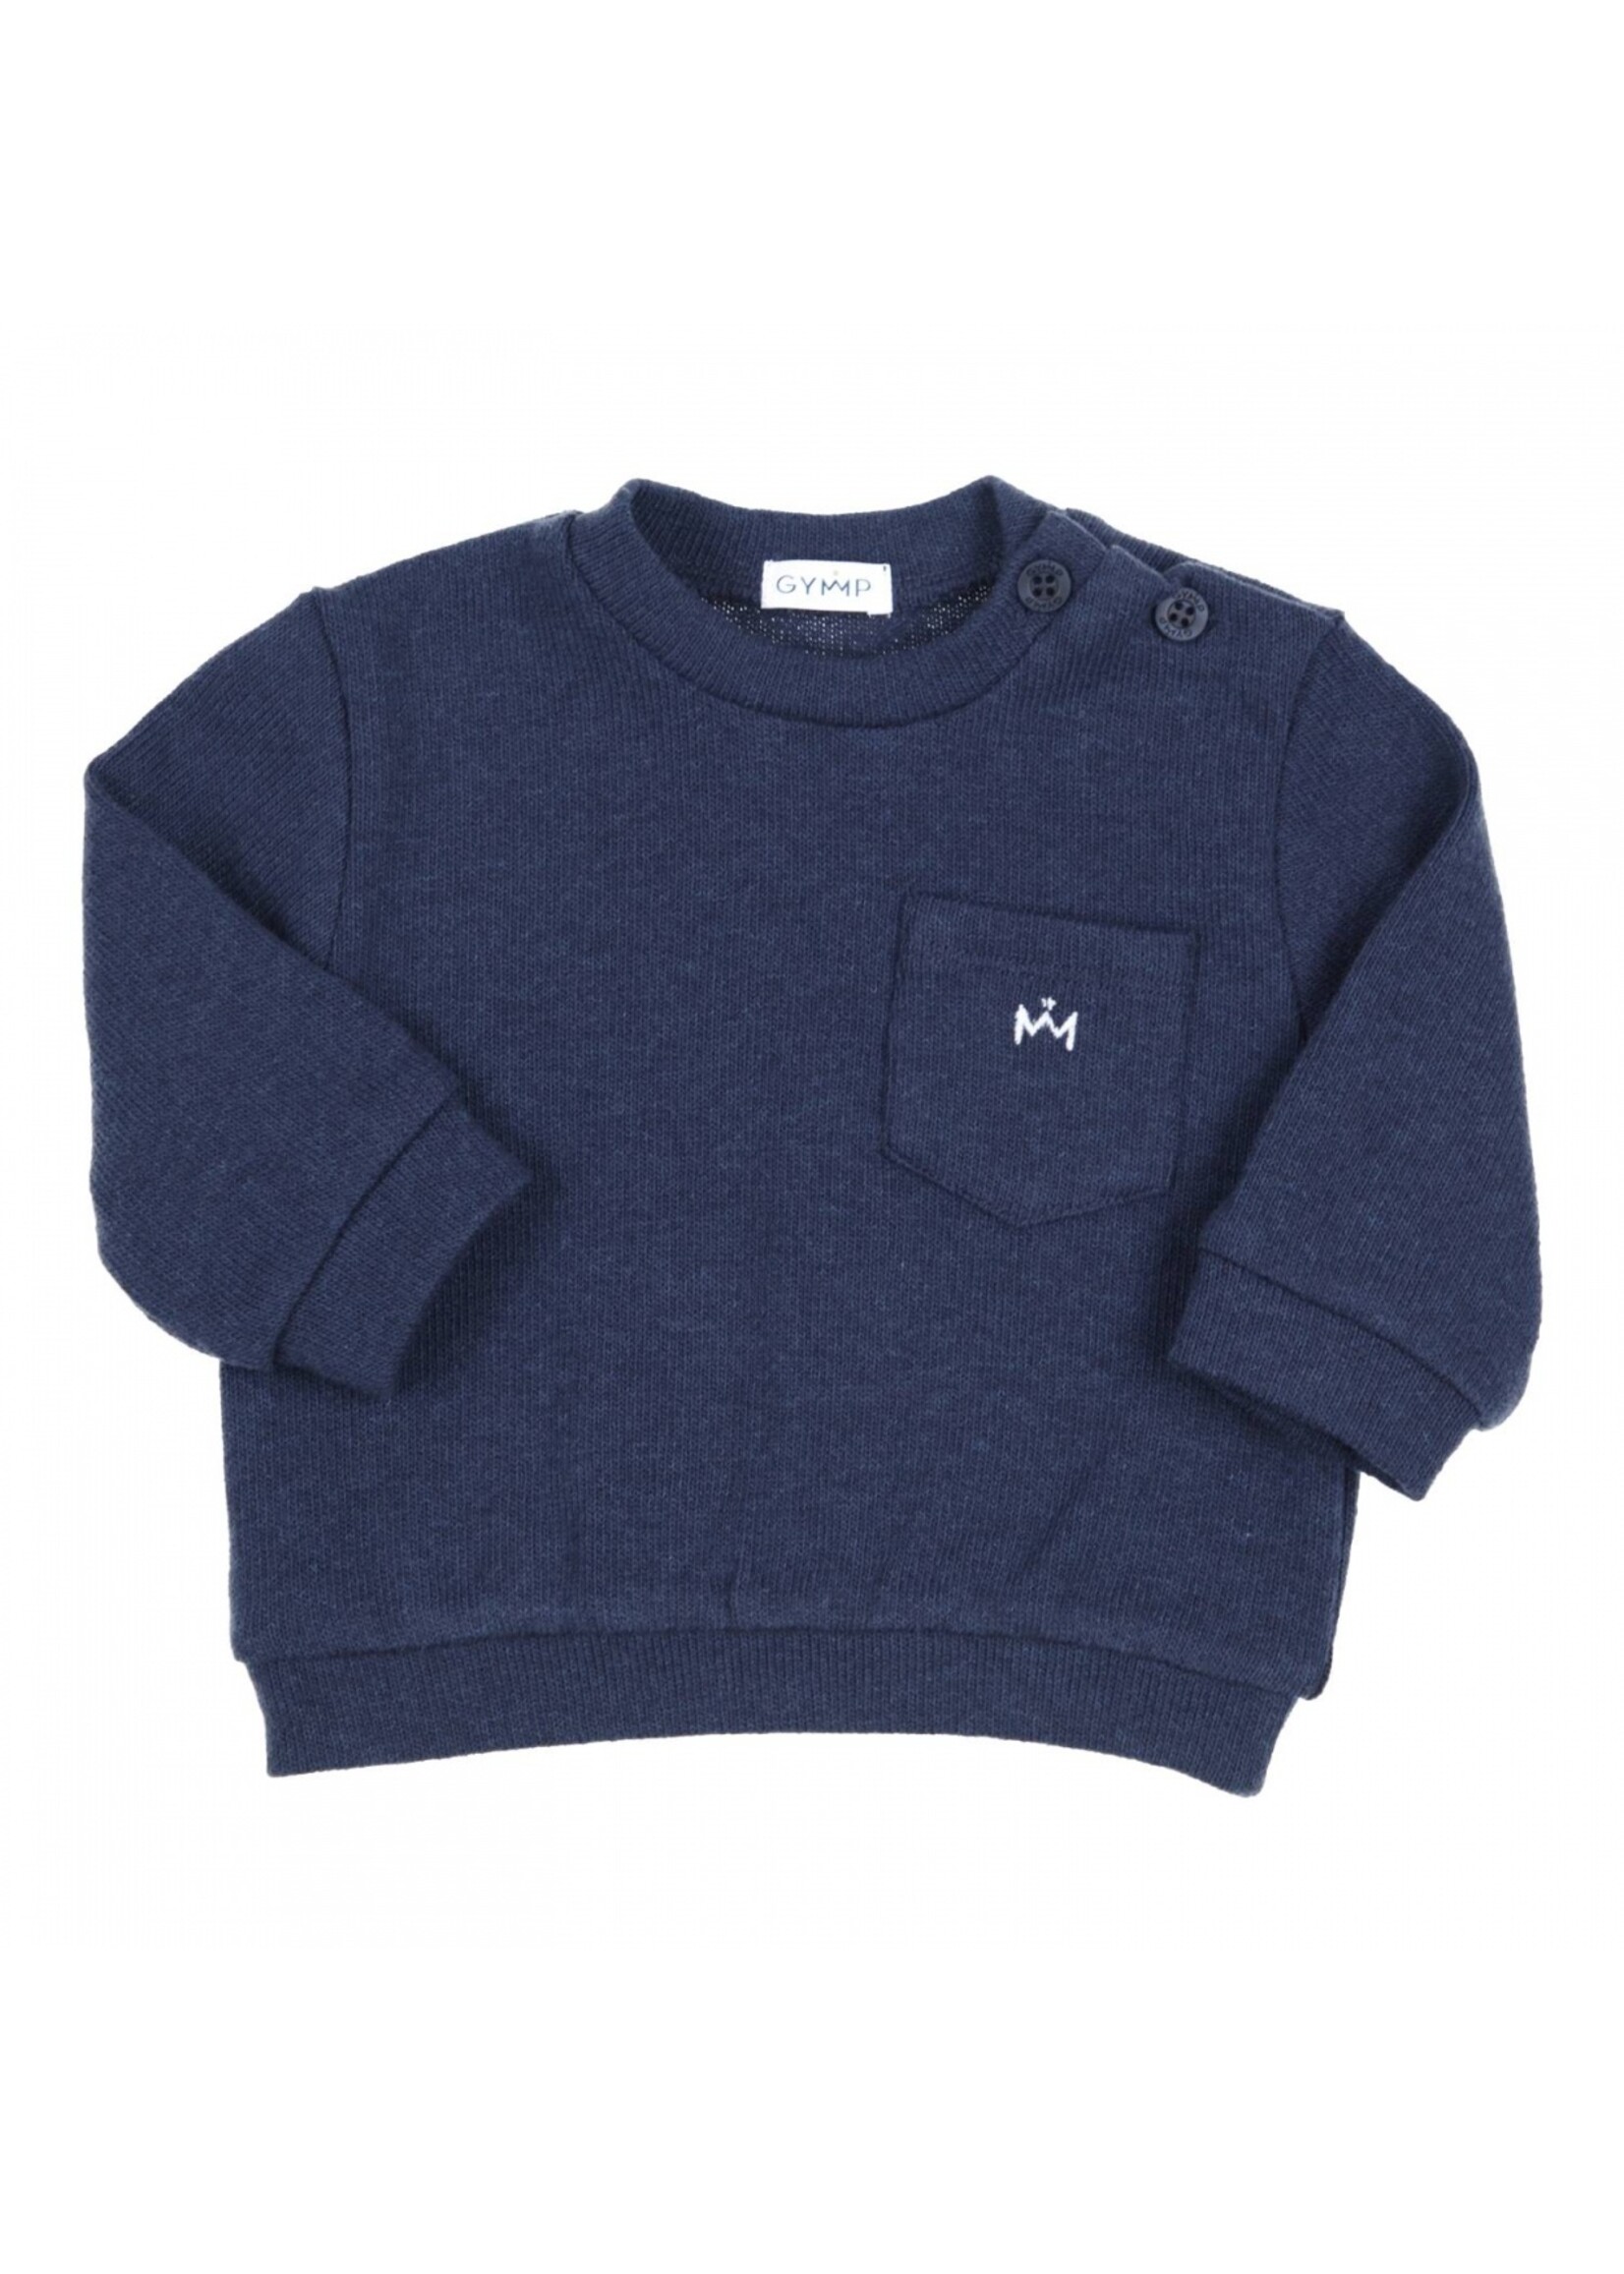 Gymp pullover gilles navy blue